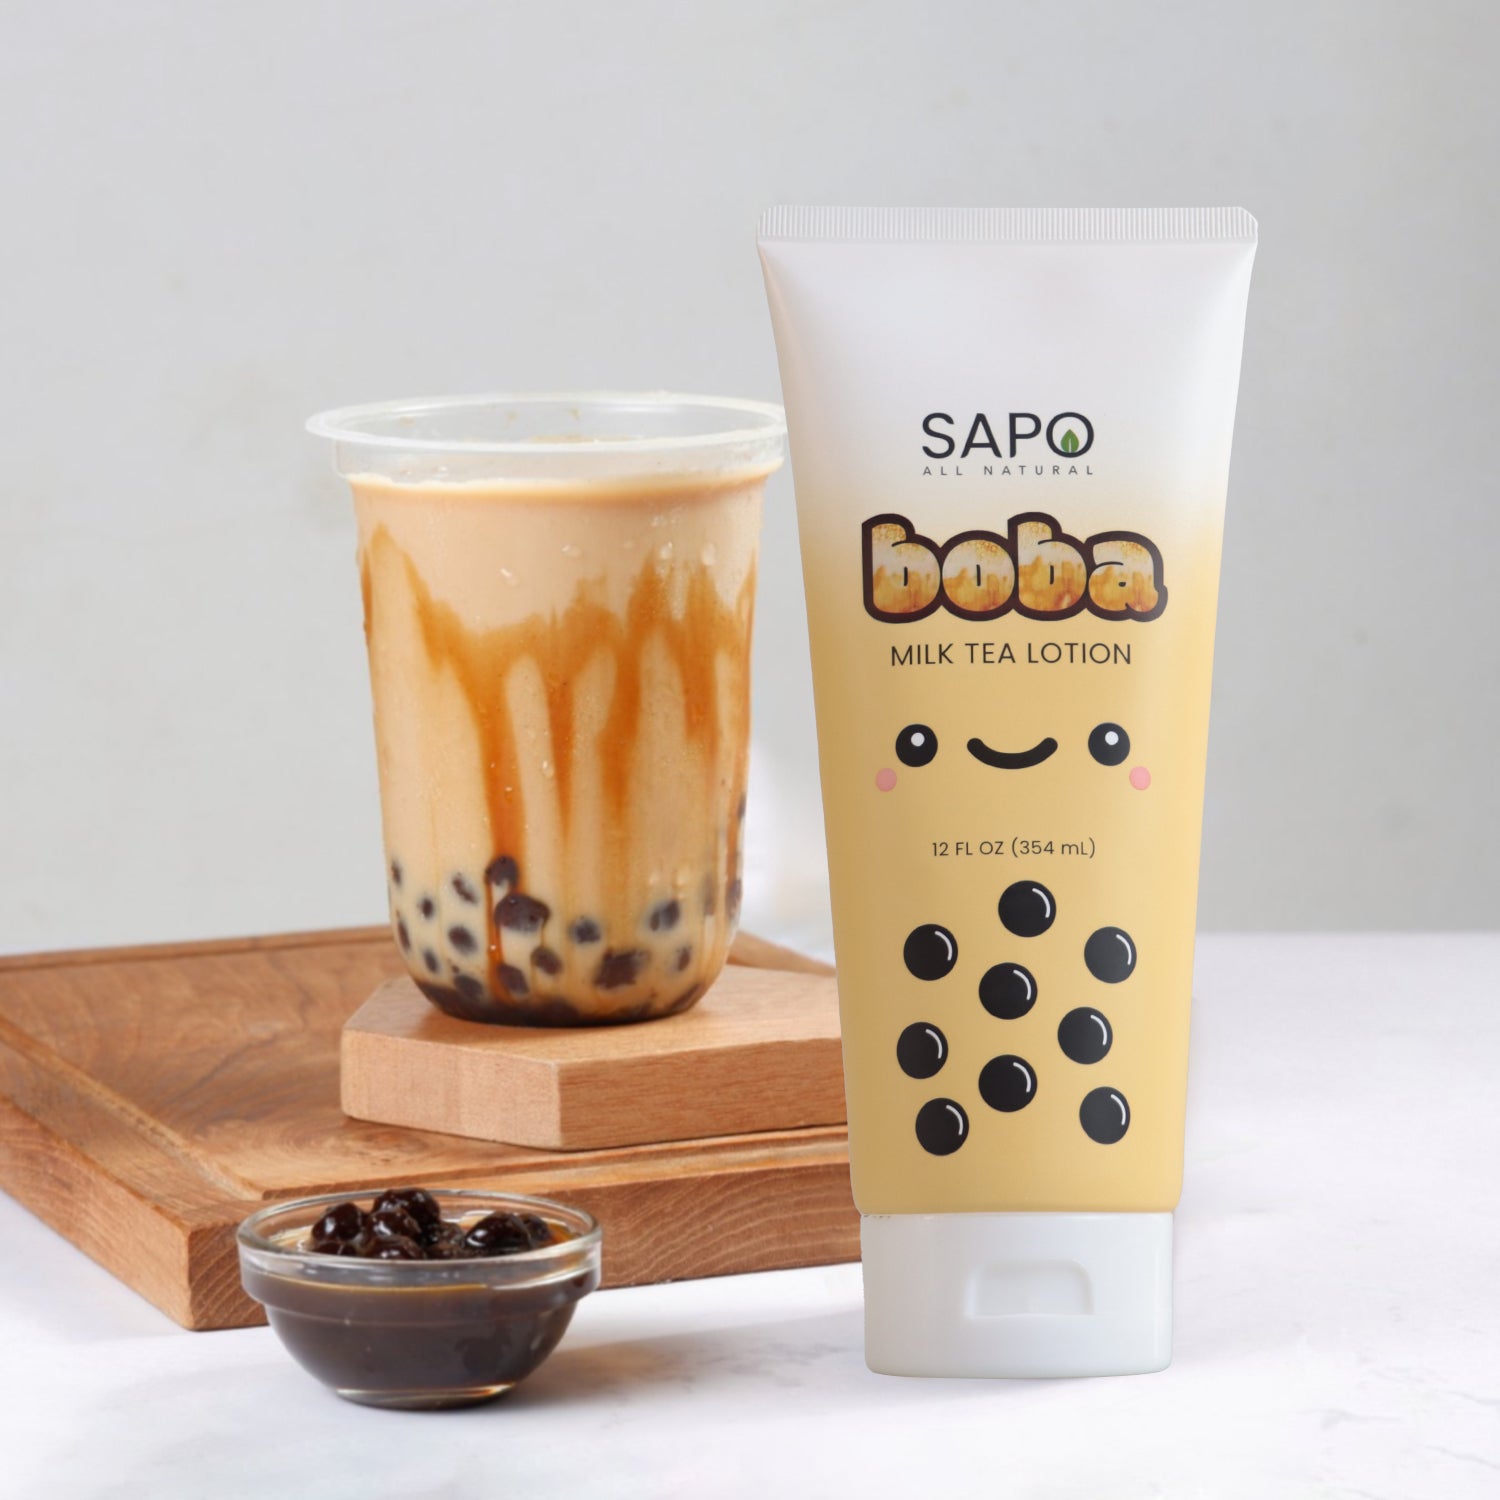 Sapo All Natural Boba Lotion - A Delicious Hand and Body Lotion Made with Aloe, Vitamin E and Hyaluronic Acid - Scented Bubble Tea Skincare Product - 12 Fl Oz